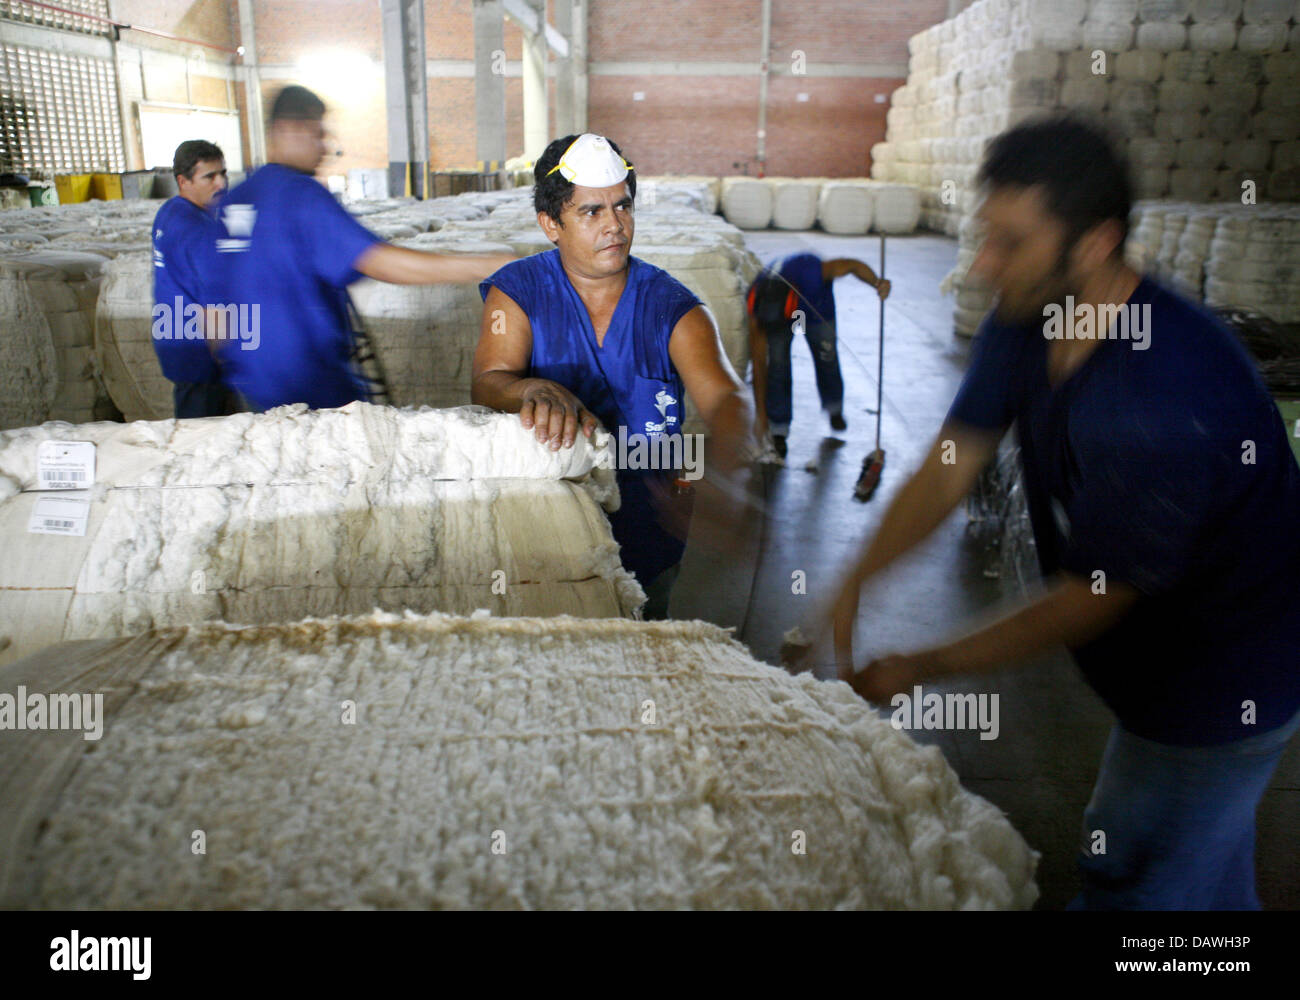 Workers move cotton bales in a wharehouse at the Jeans factory Santana in Fortaleza, Brazil, 11 April 2007. Photo: Soeren Stache Stock Photo